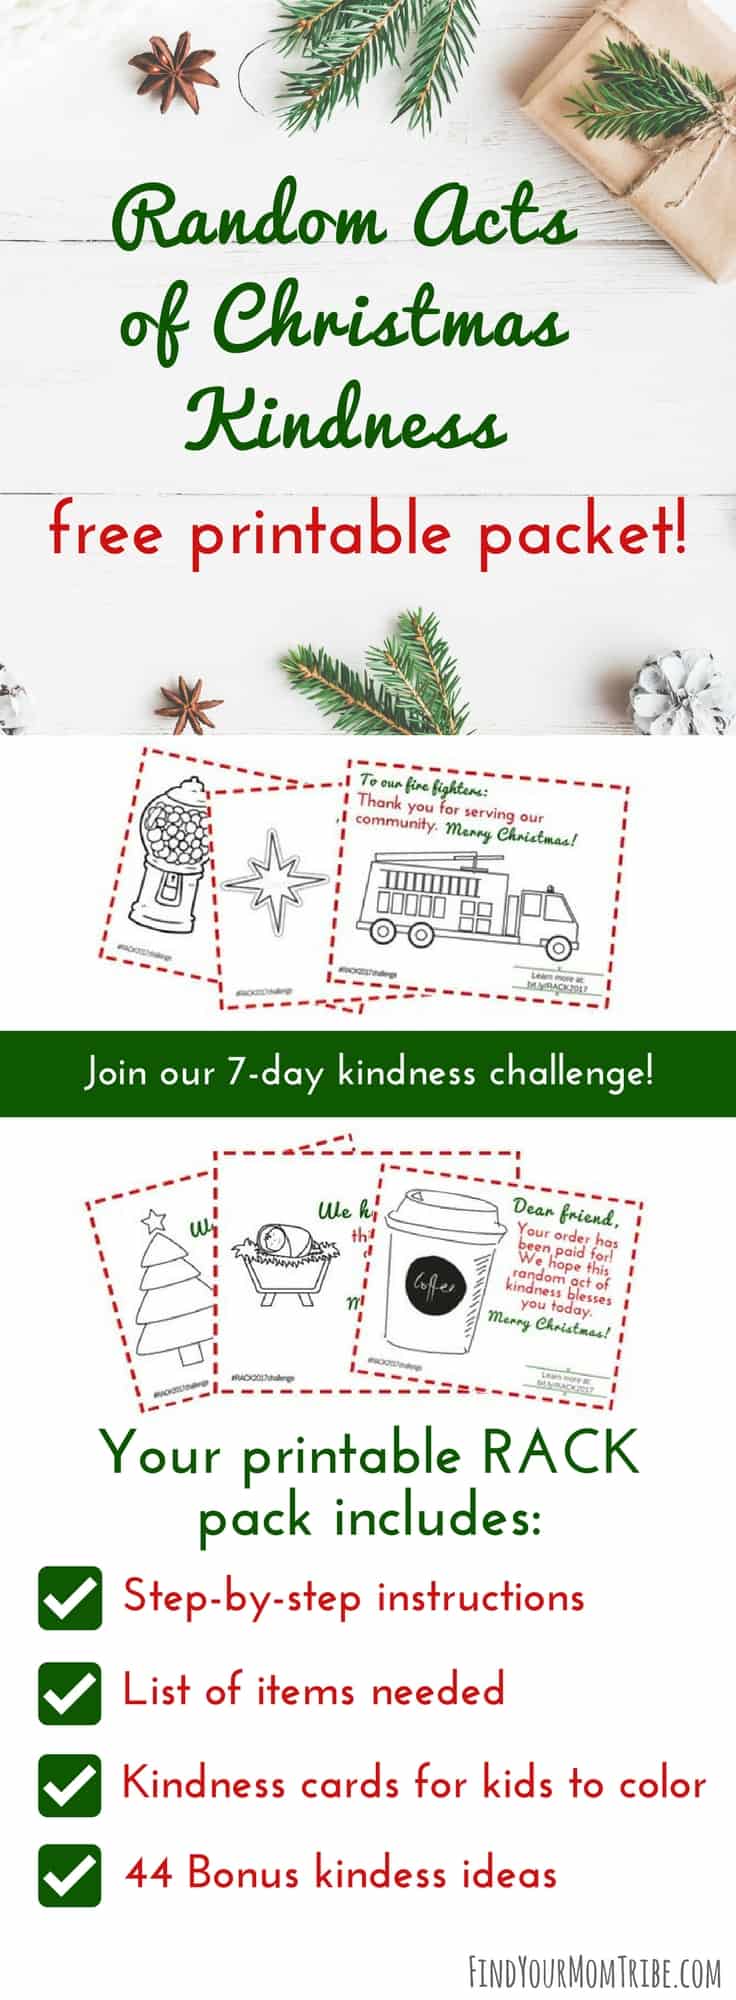 Be intentional this Christmas season and spread Random Acts of Christmas Kindness! Click here to get your free Random Acts of Kindness packet! It includes 20 pages of kindness ideas, step-by-step directions, and free kindness cards. #Christmas #Christmas2017 #Christmasideas #RandomActsofKindness #freeprintable #freeprintables #freeChristmasprintables